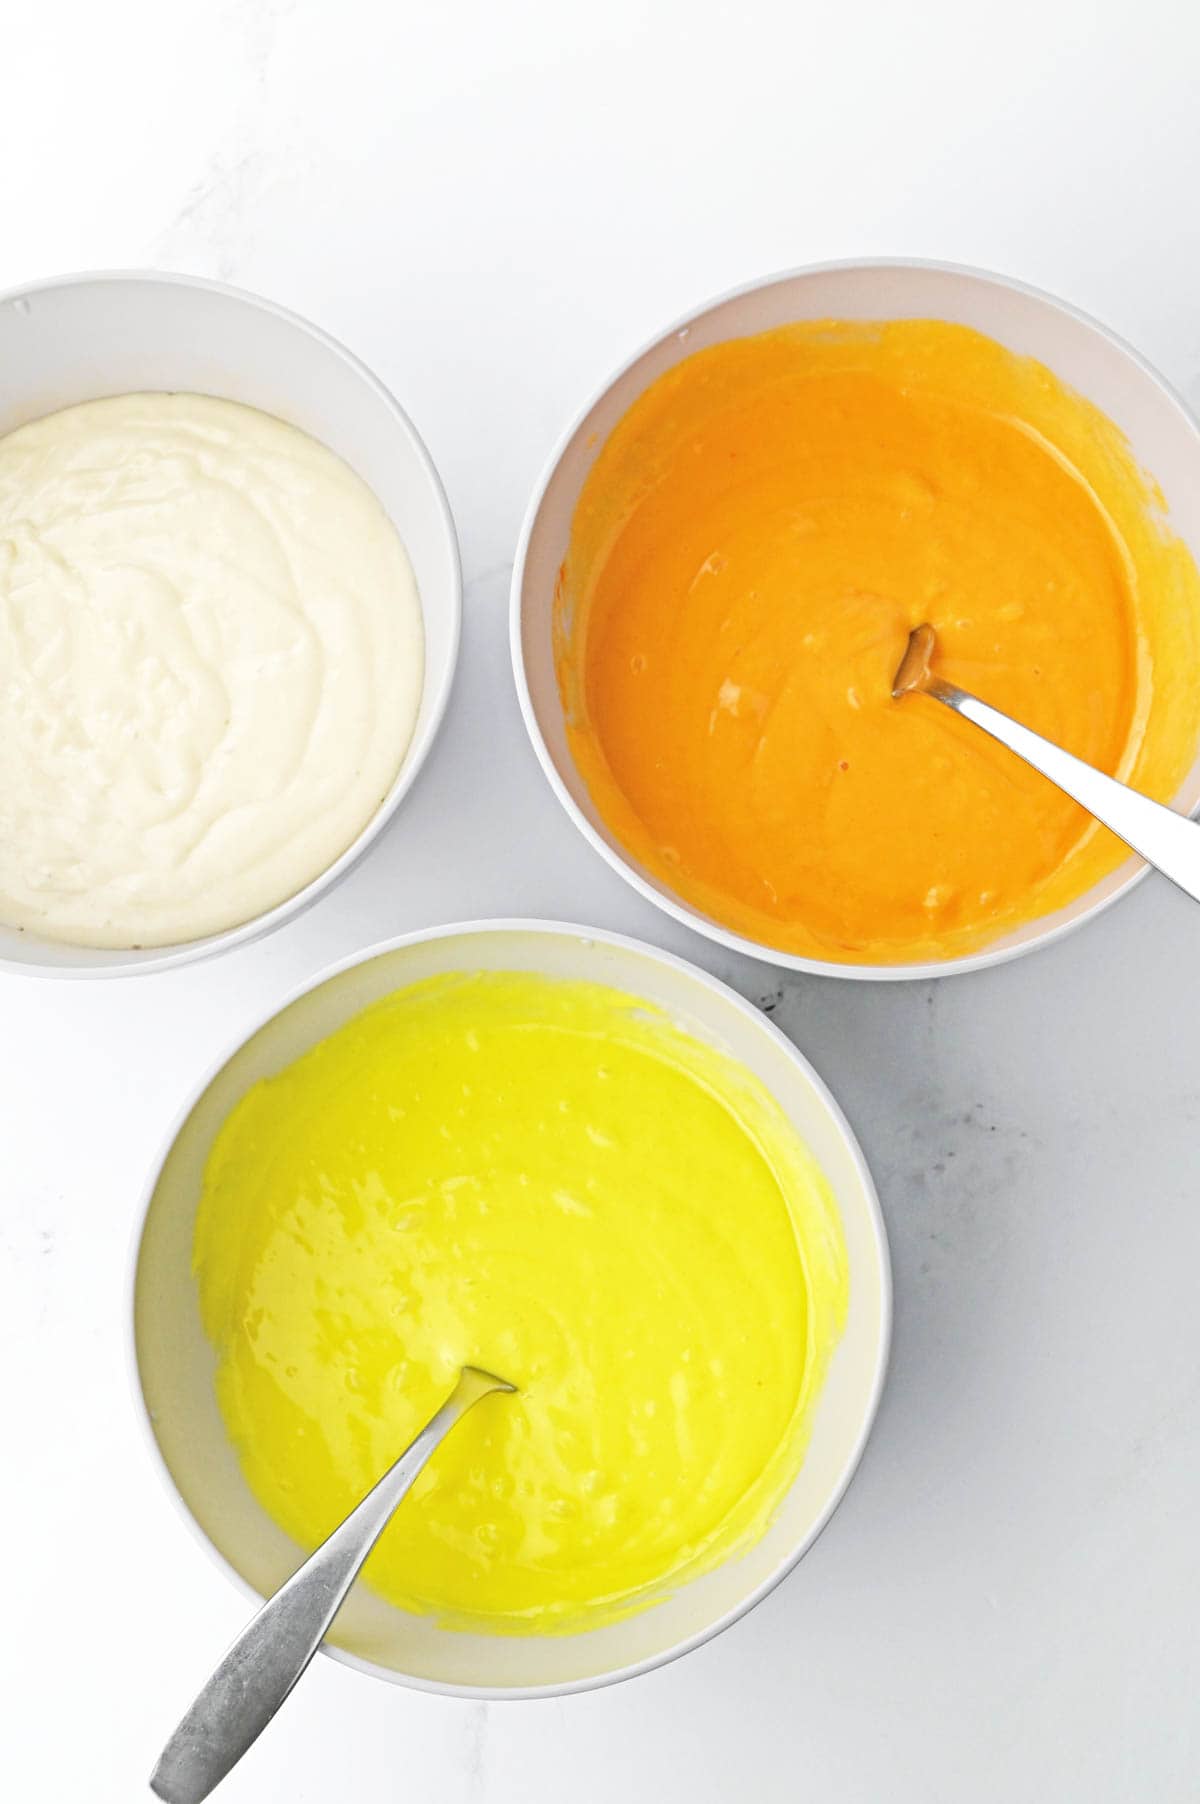 Cake batter with yellow and orange food coloring